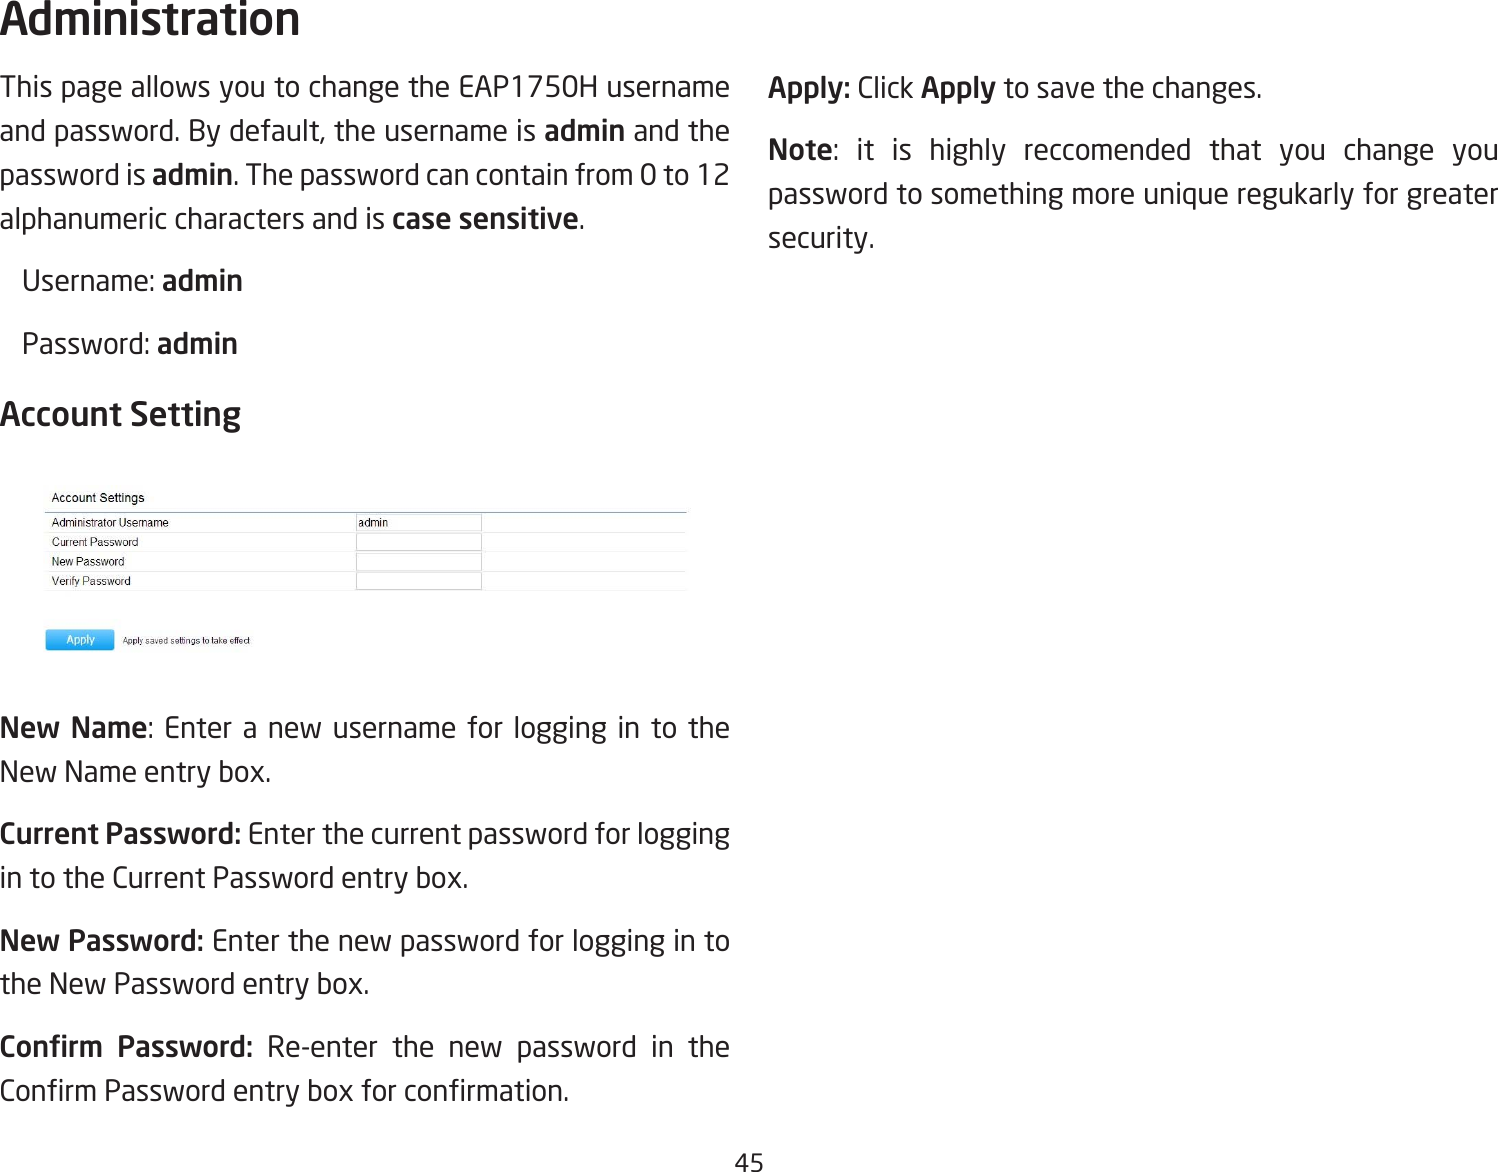 45This page allows you to change the EAP1750H username and password. By default, the username is admin and the password is admin. The password can contain from 0 to 12 alphanumeric characters and is case sensitive. Username:admin Password:adminAccount SettingNew Name: Enter a new username for logging in to theNew Name entry box.Current Password: Enter the current password for logging in to the Current Password entry box.New Password: Enter the new password for logging in to the New Password entry box.Conrm  Password: Re-enter the new password in the ConrmPasswordentryboxforconrmation.Apply: Click Apply to save the changes.Note: it is highly reccomended that you change youpassword to something more unique regukarly for greater security.Administration